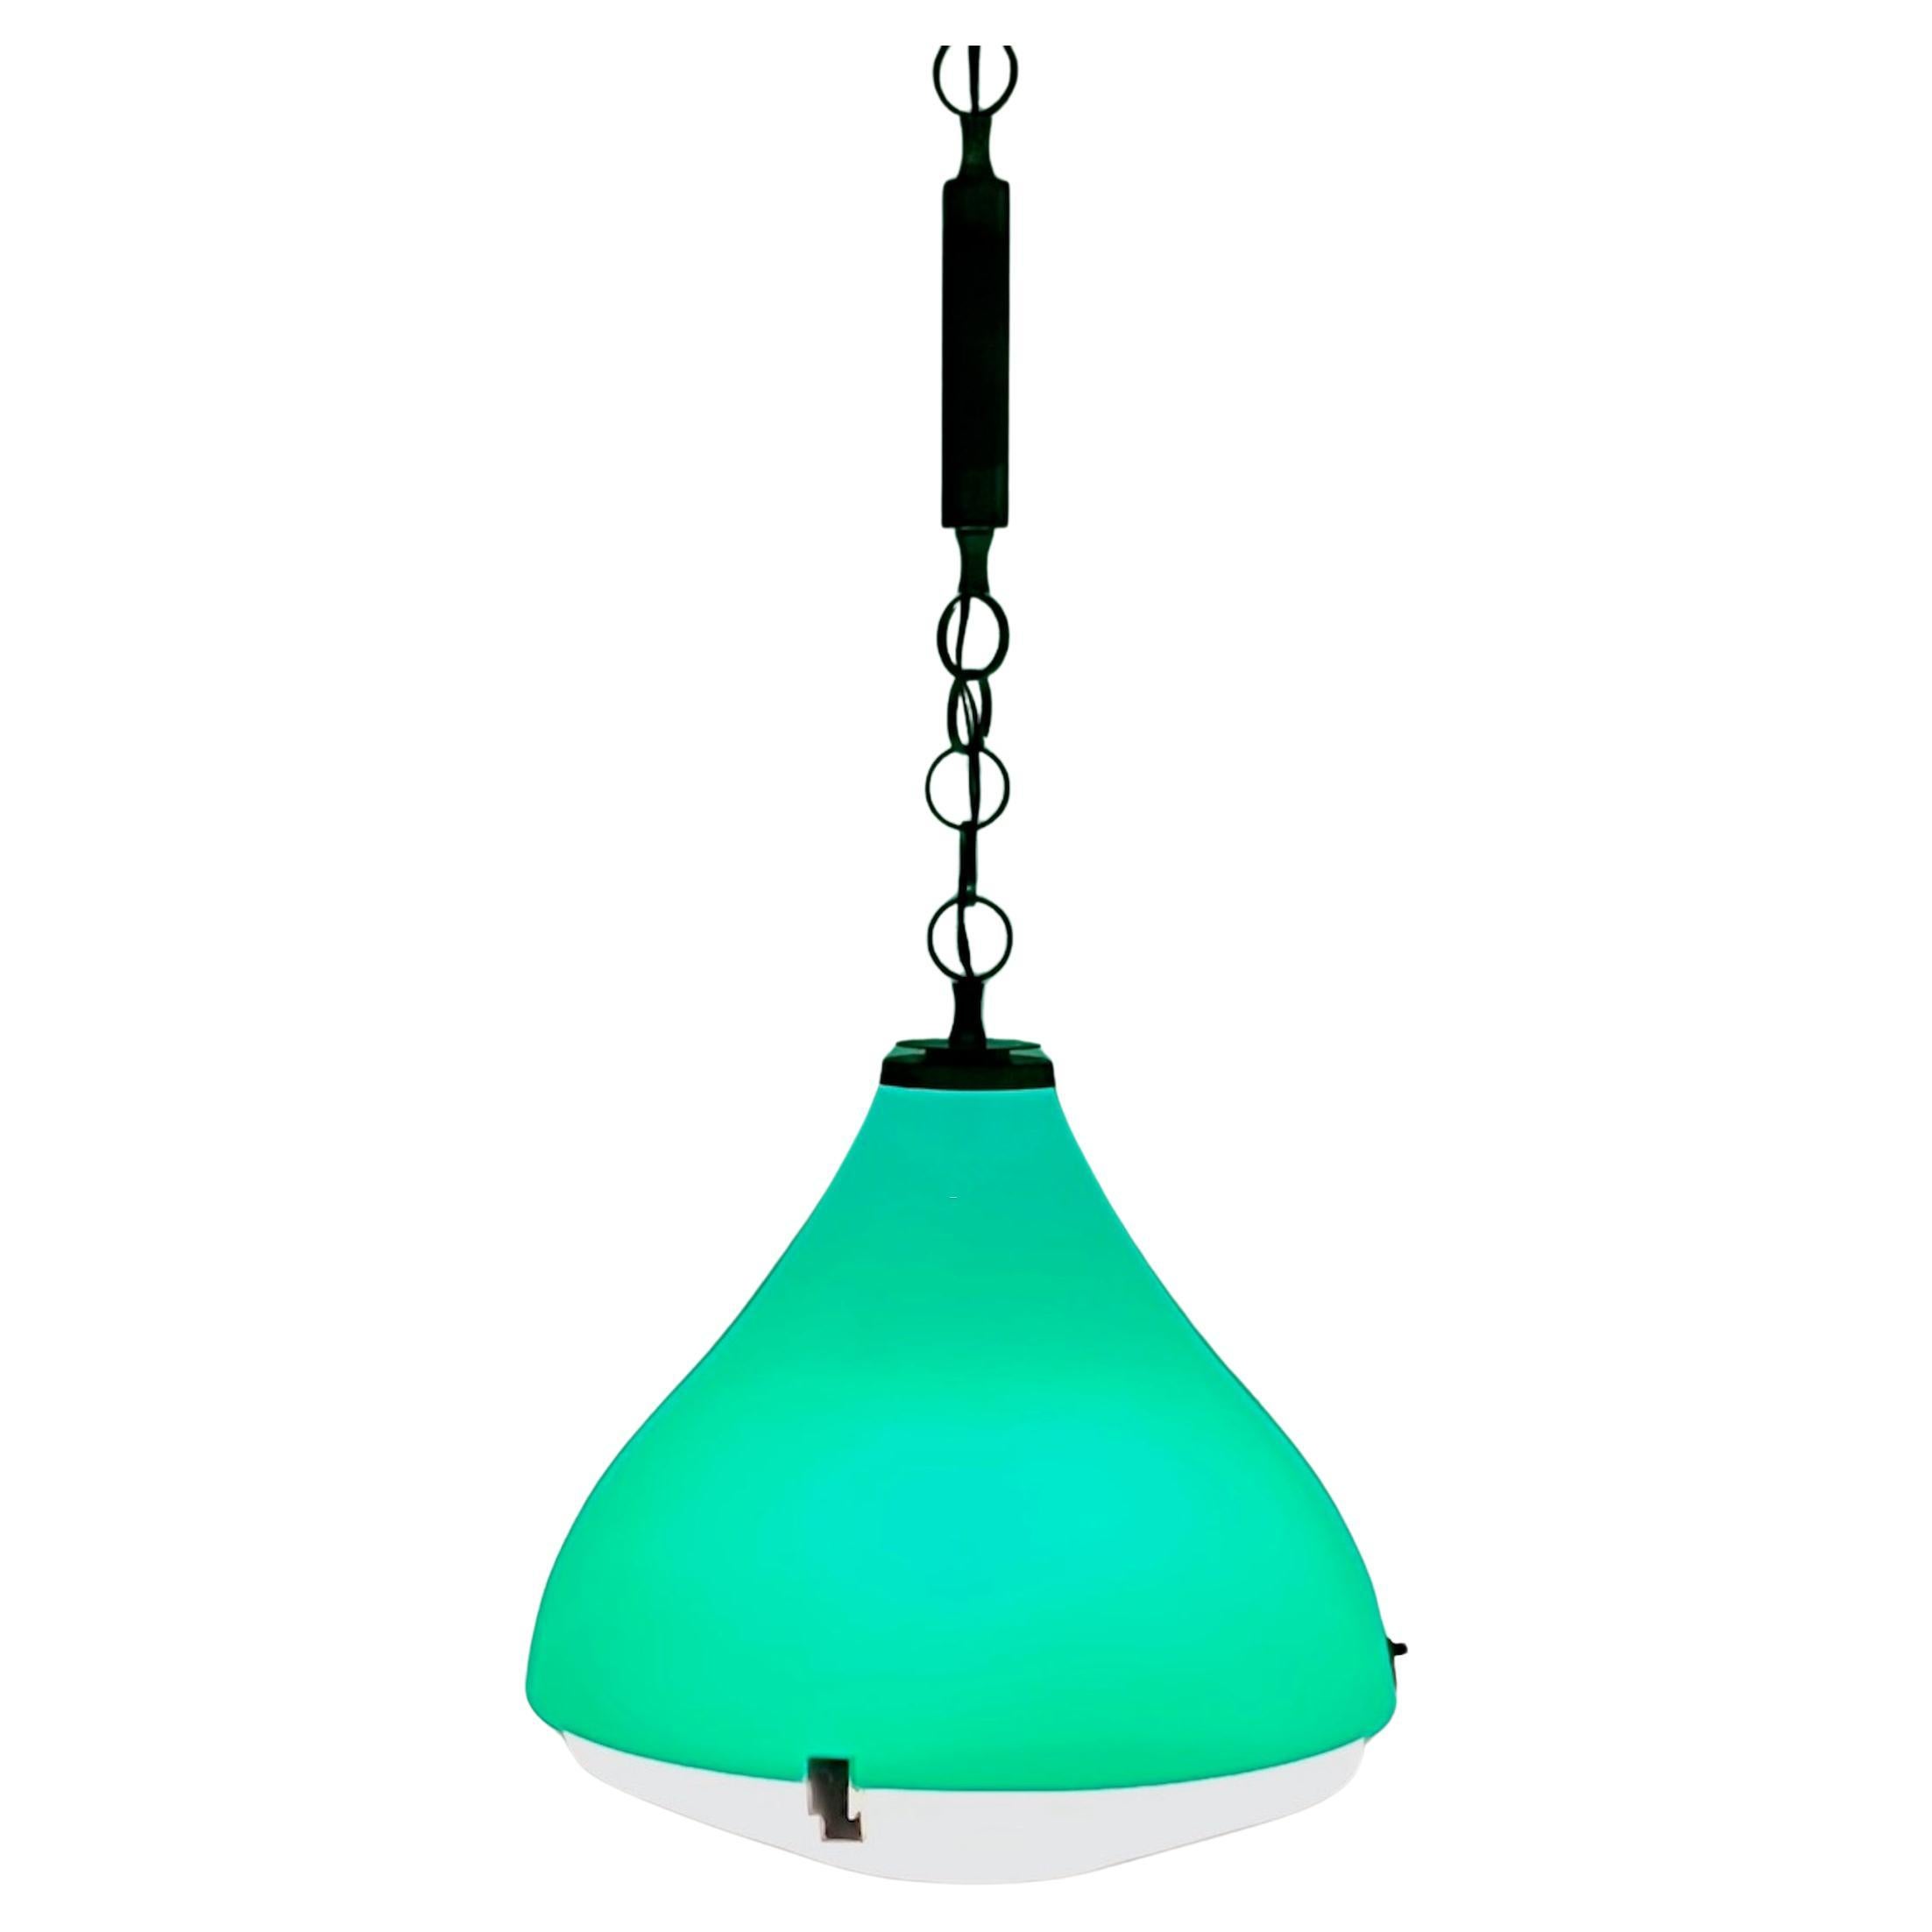 Large Vintage Pendant Lamp in Green made in Italy, 1960s 